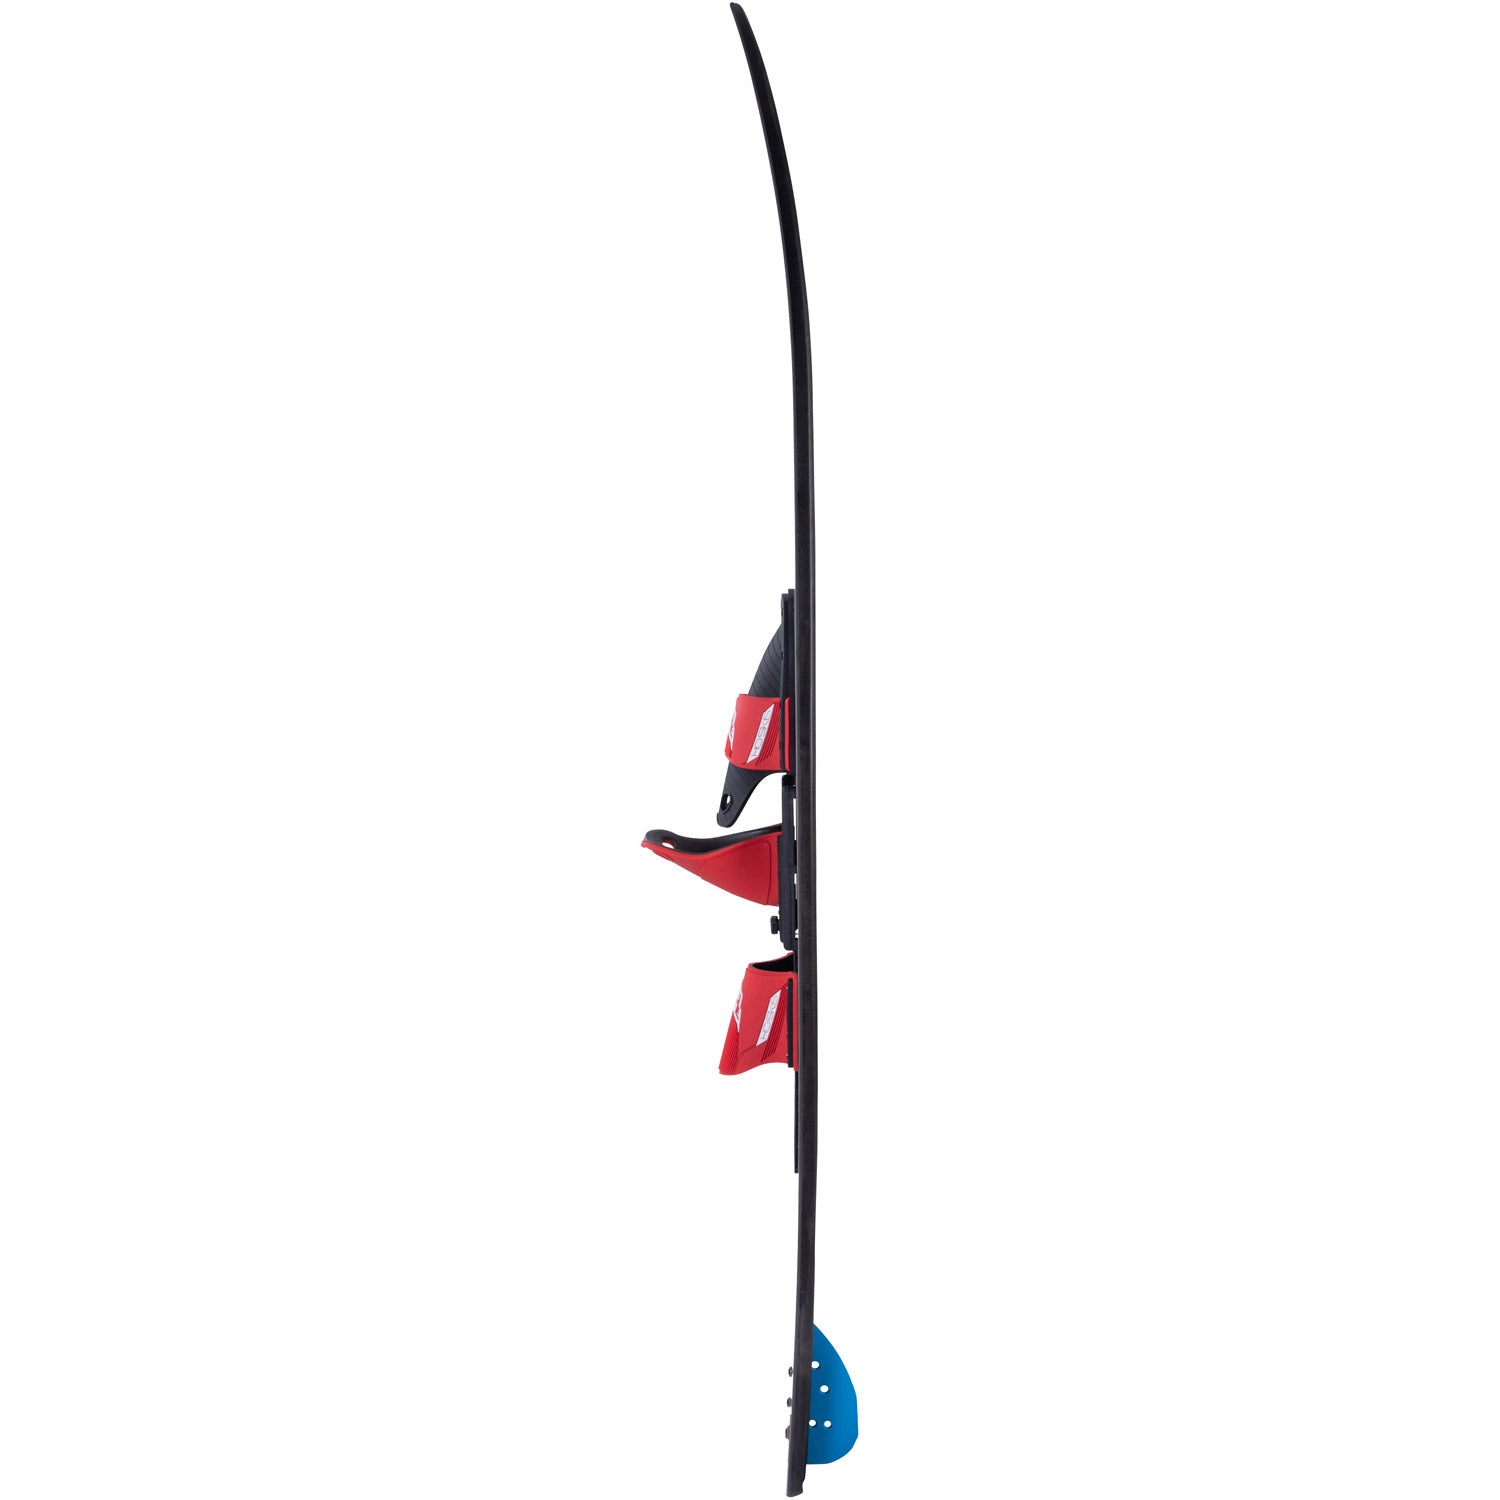 Blast Youth Combo Water Skis